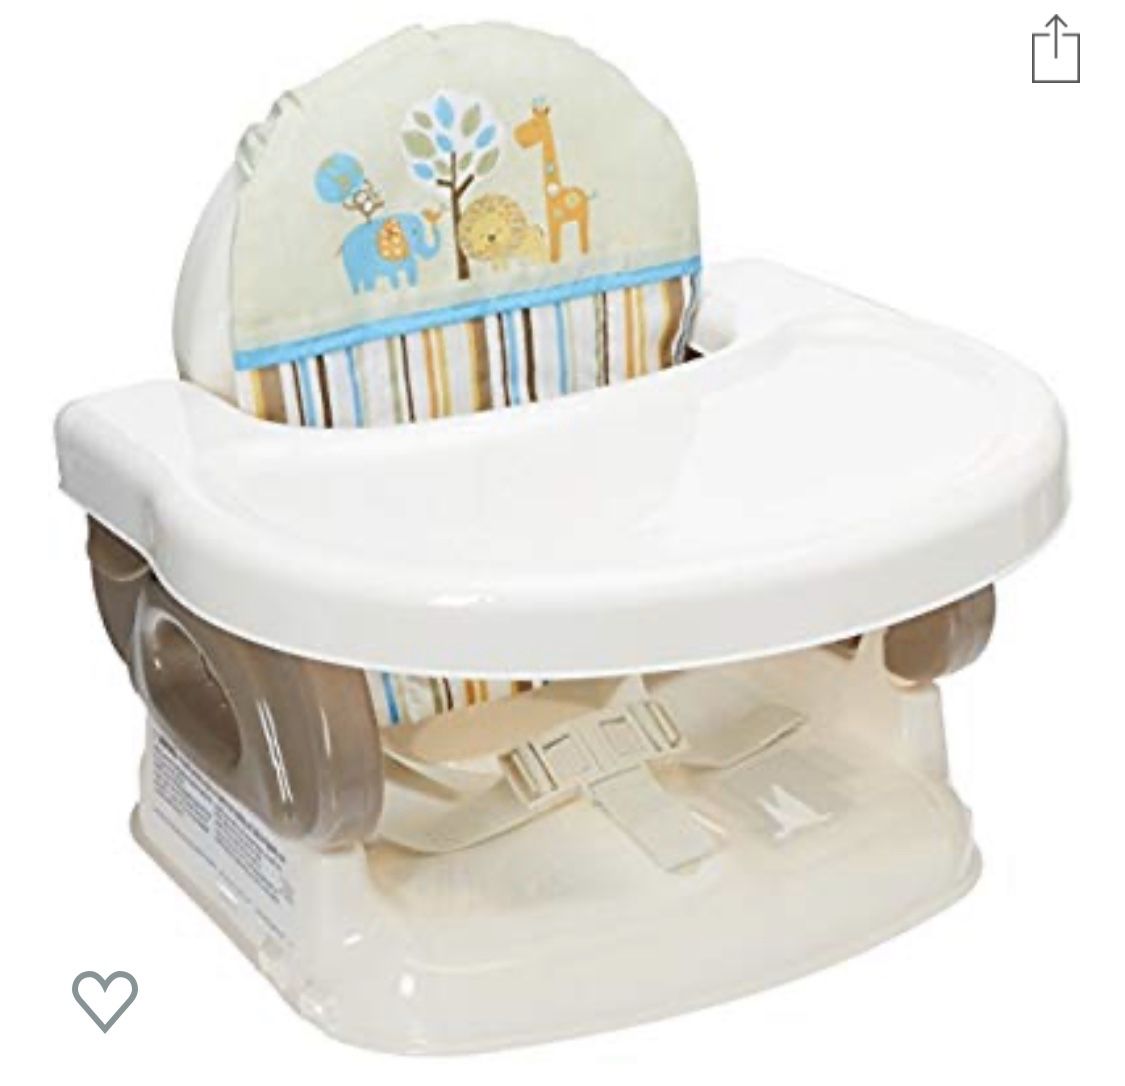 Summer Infant Deluxe Folding Booster Seat High Chair